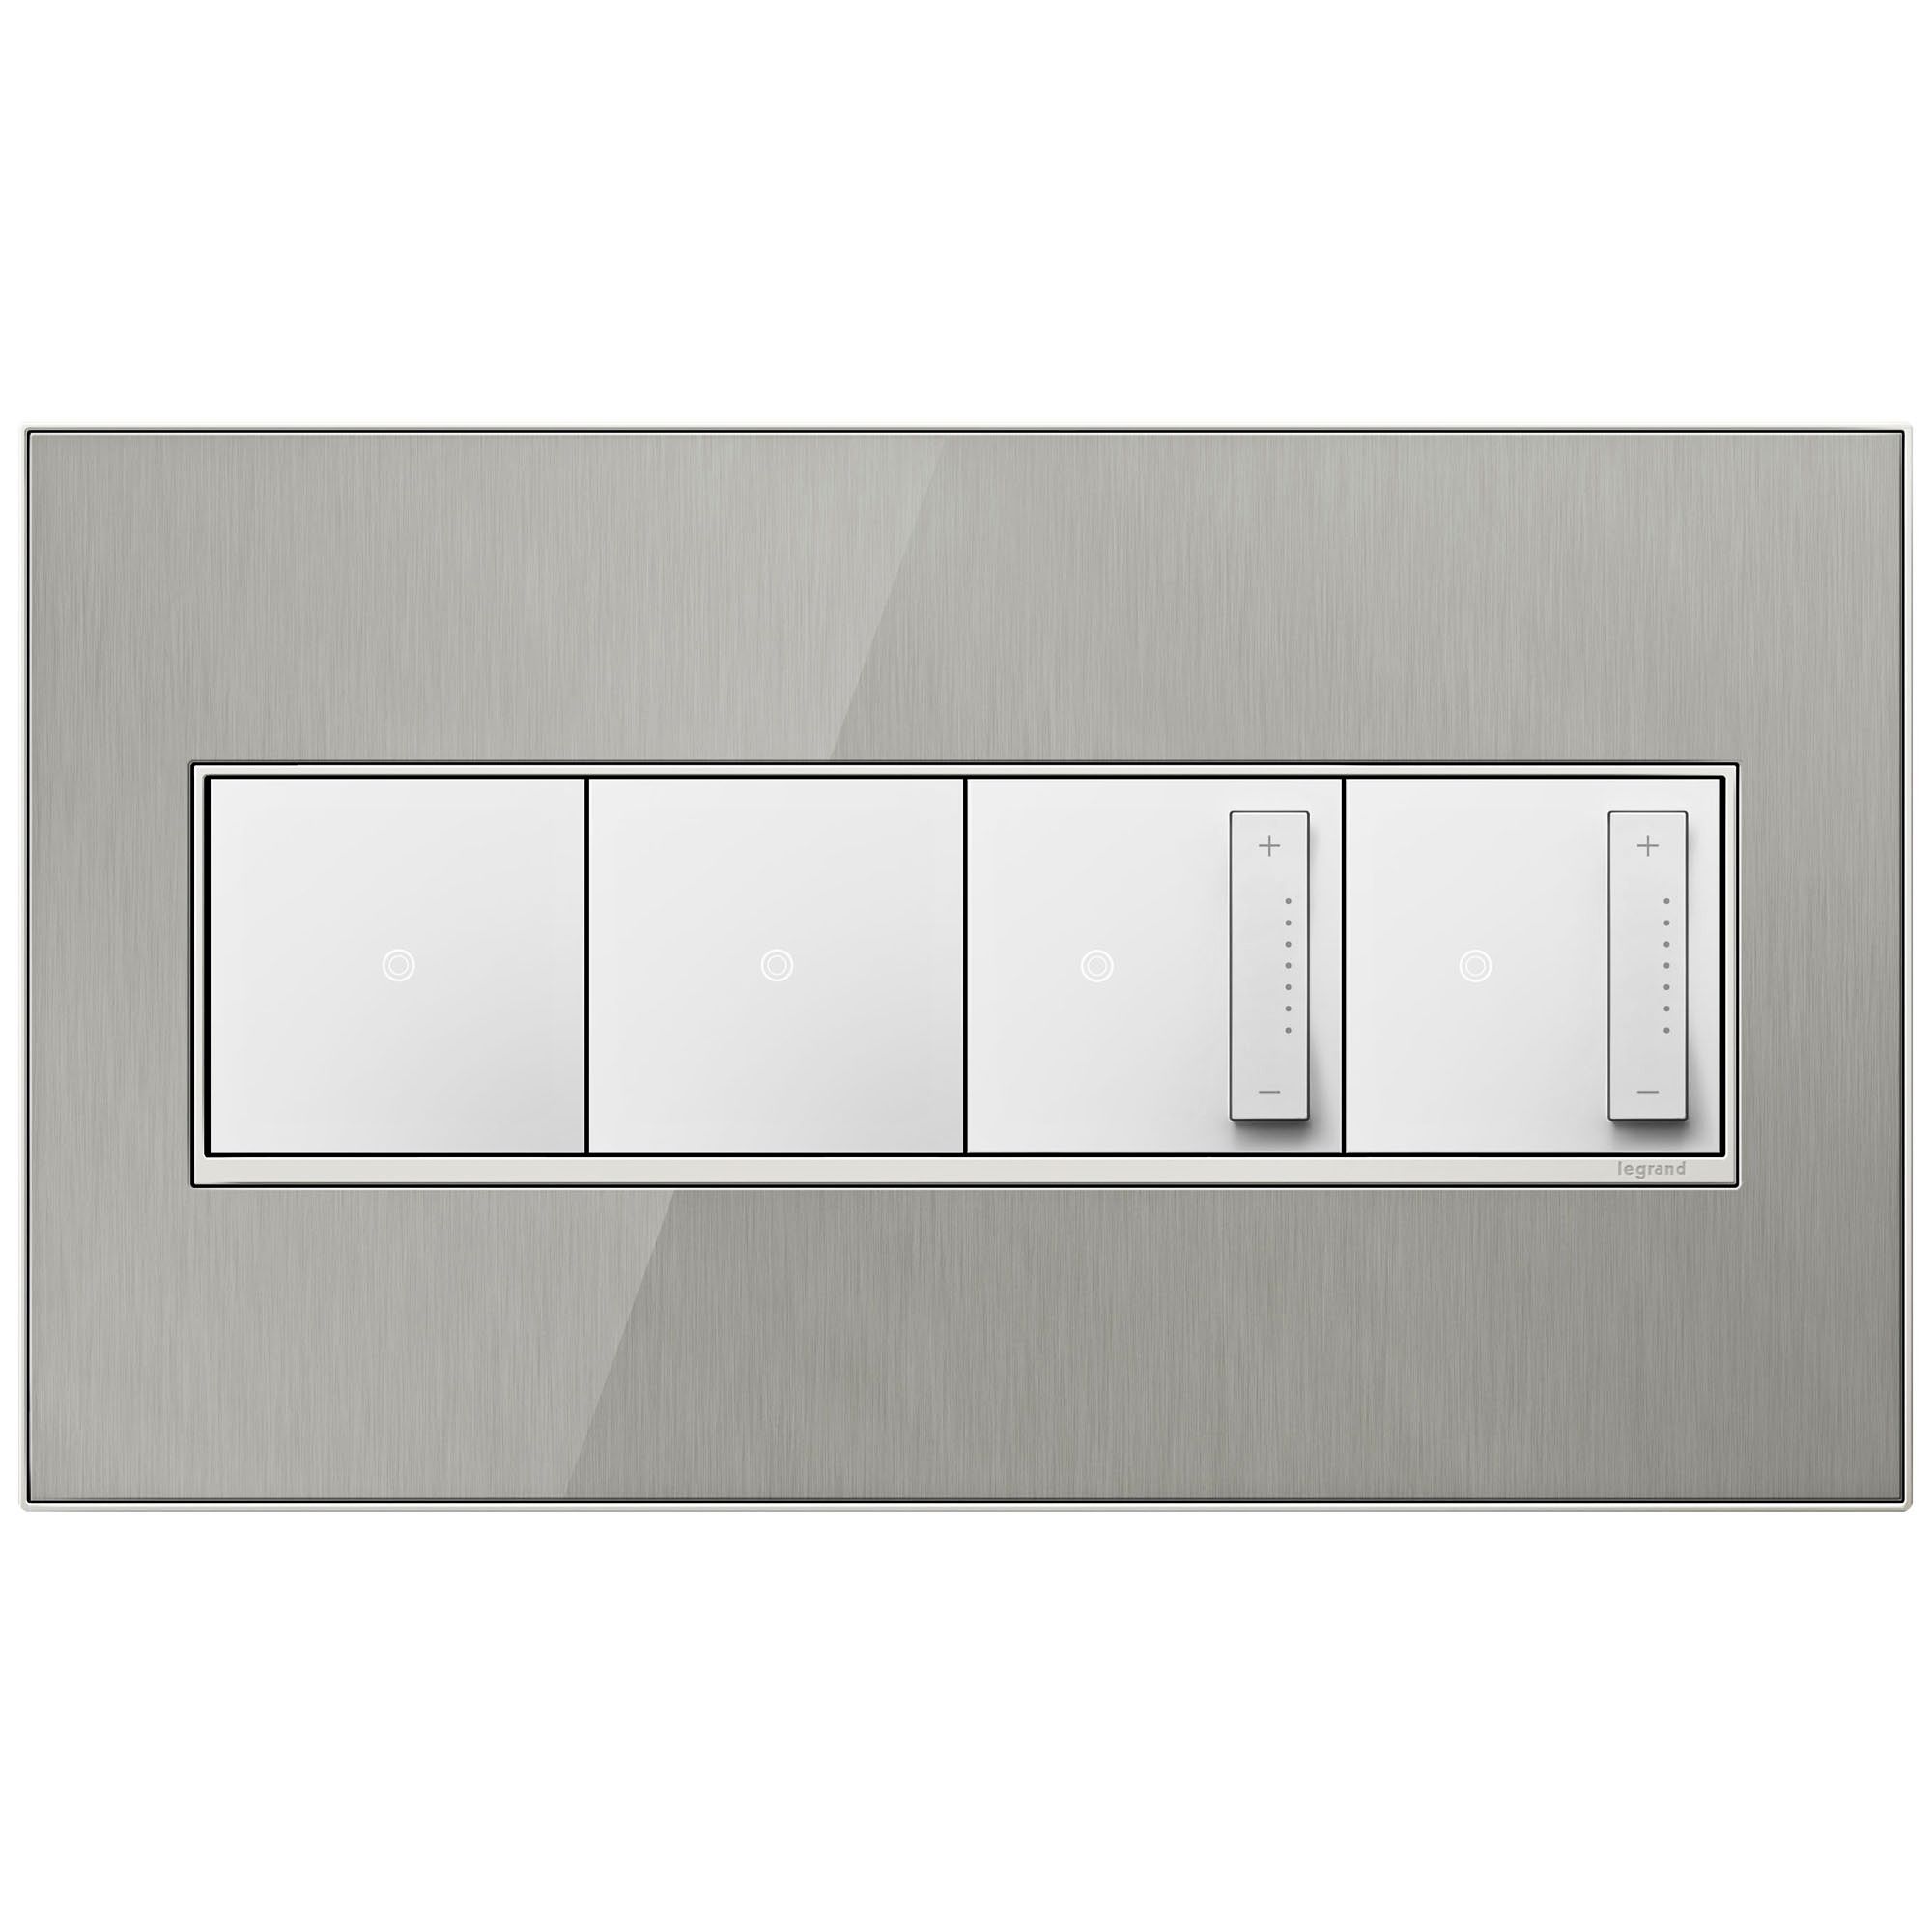 Stainless Steel 4-Gang Wall Plate w/ 2 Switches and 2 Dimmers